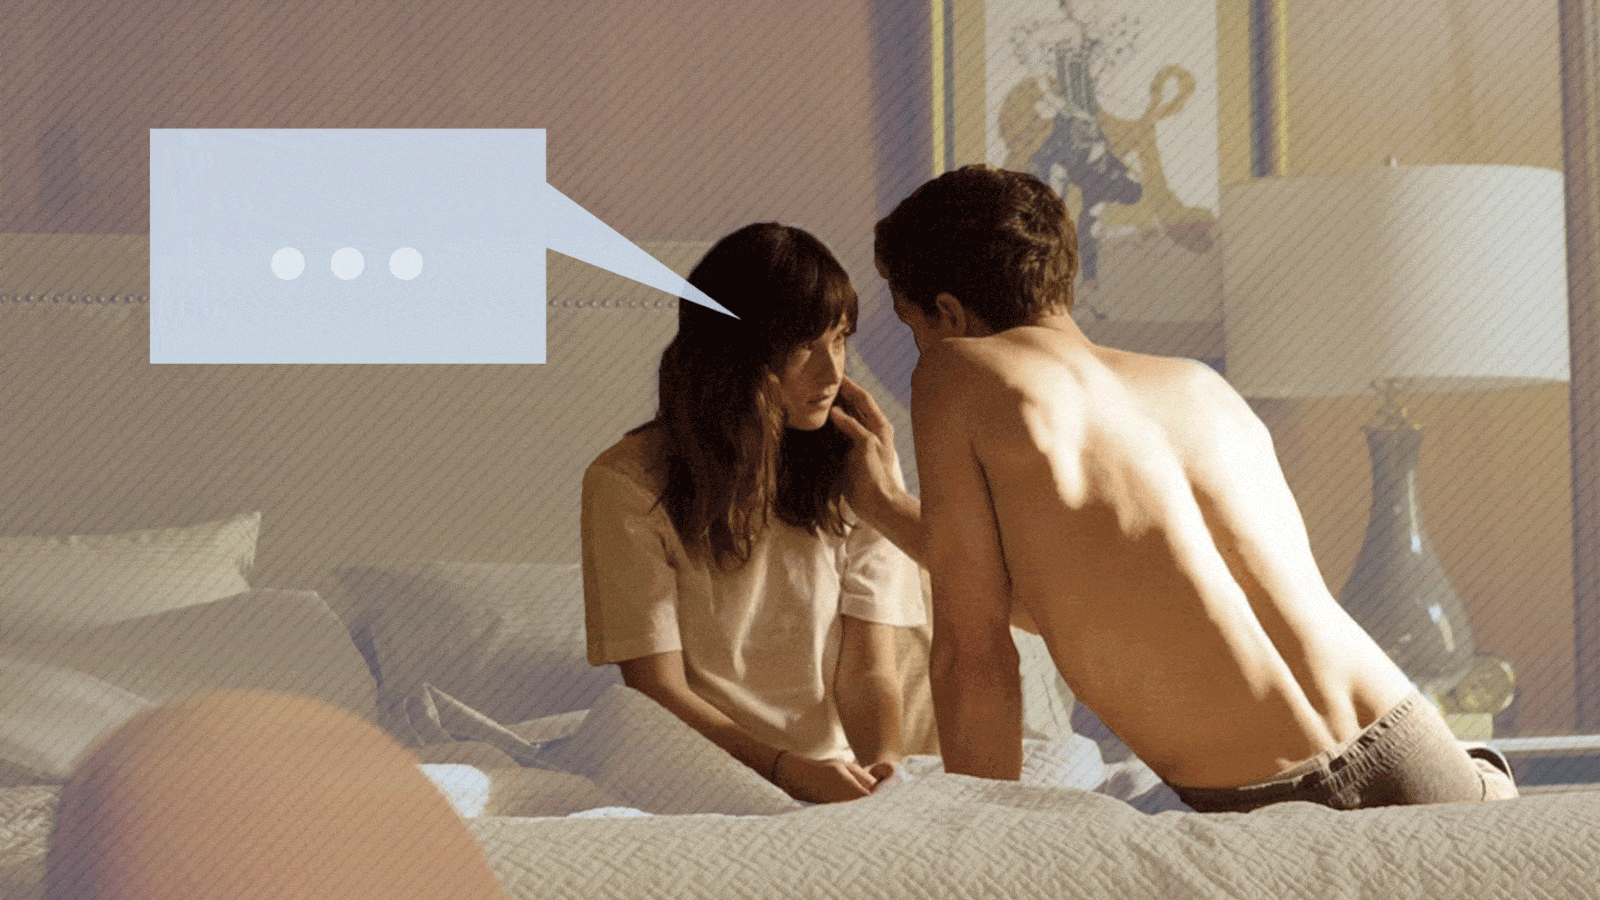 brent shawl recommends 50 shades of grey sex scenes gif pic